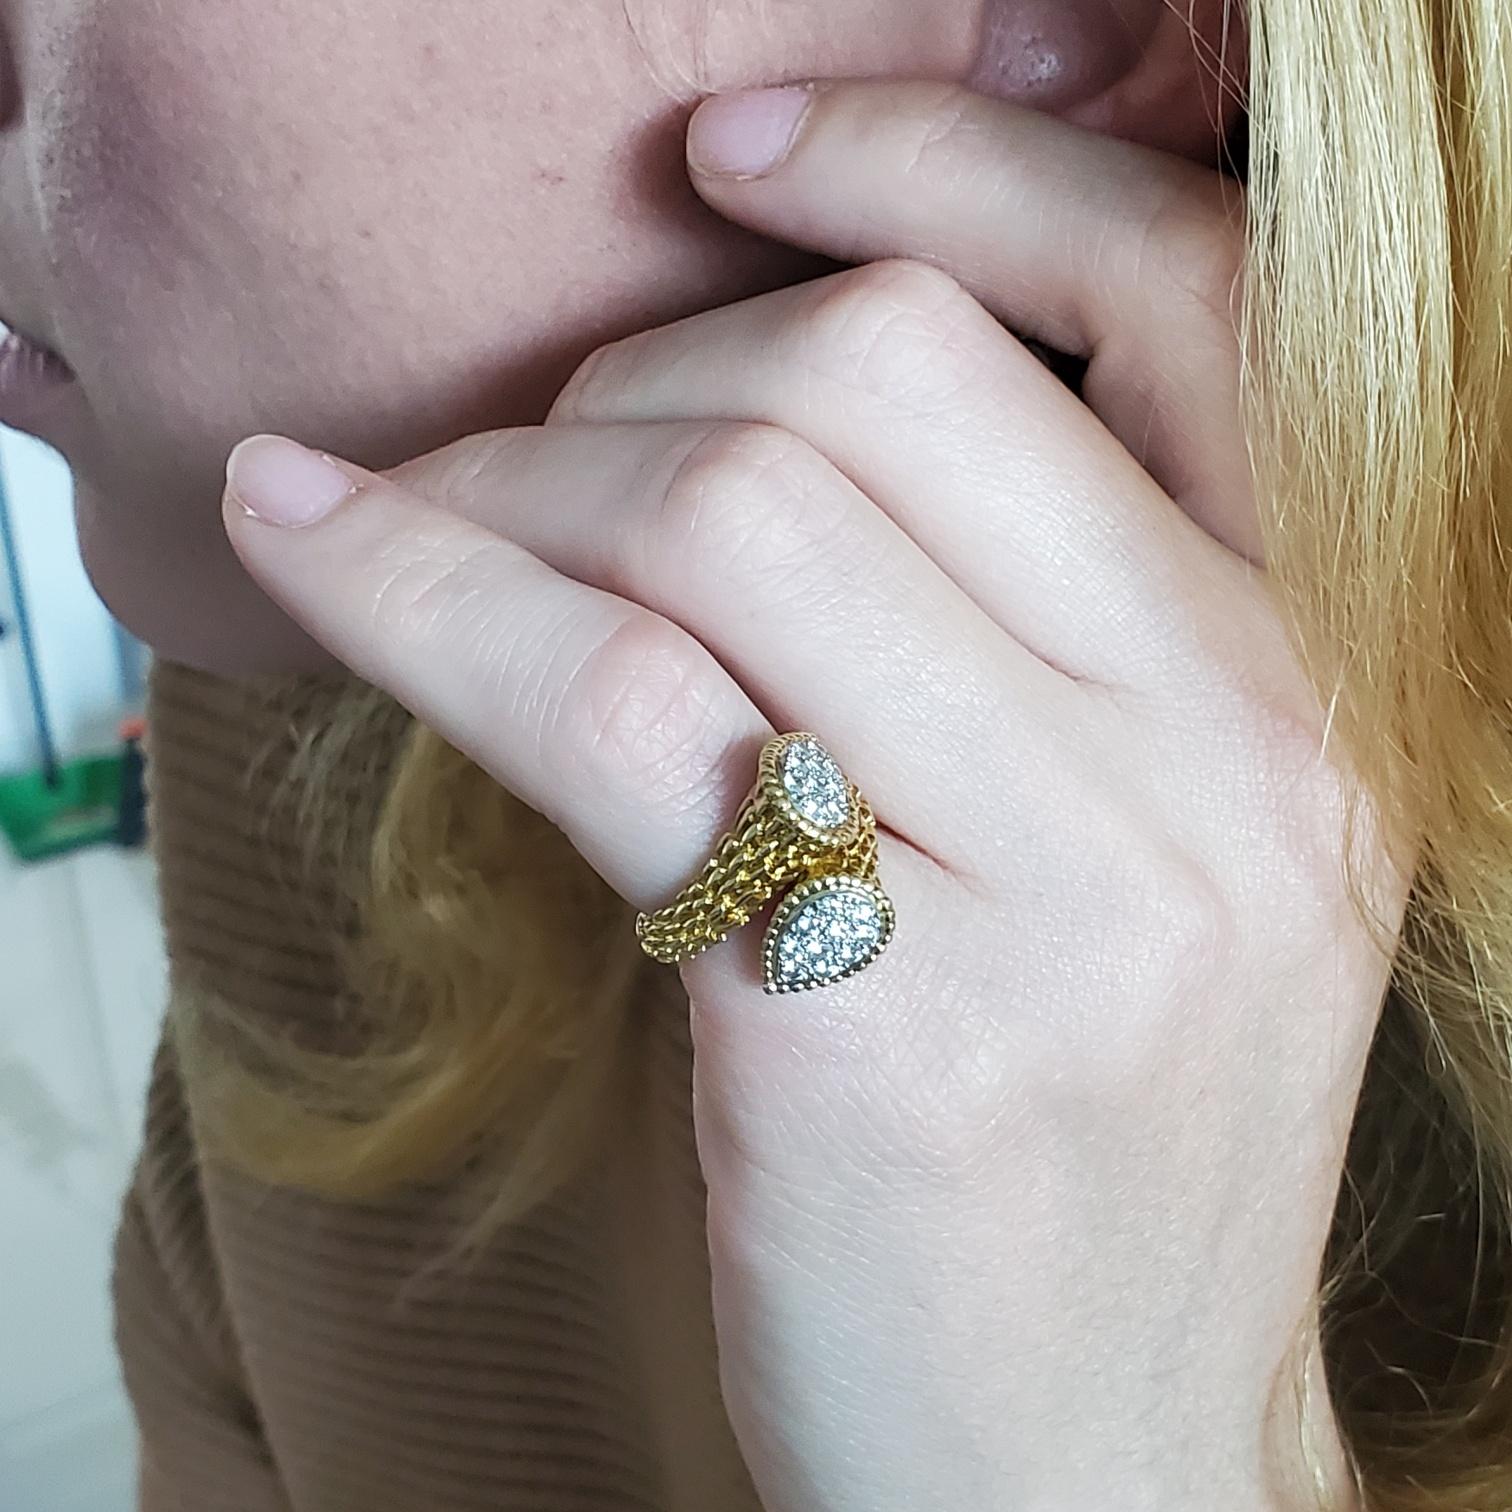 Serpent Boheme Toe Et Moi ring designed by Boucheron.

This is one of the most iconic piece from the French jewelry house of Boucheron. This classic serpent Boheme toi et moi style ring was carefully crafted in solid yellow gold of 18 karats with